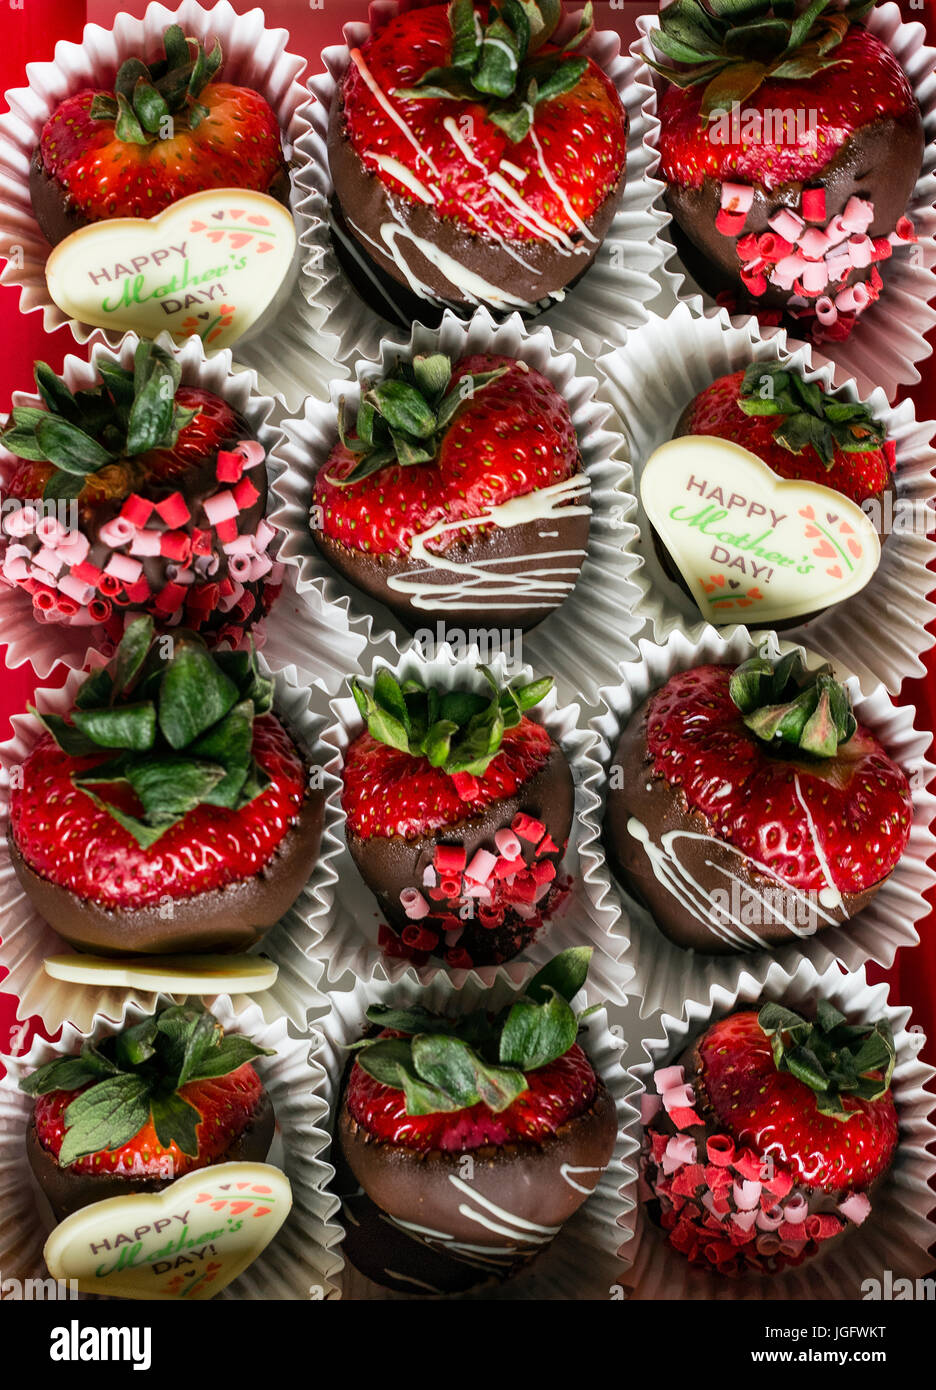 Chocolate covered strawberry Mother's Day gift. Stock Photo